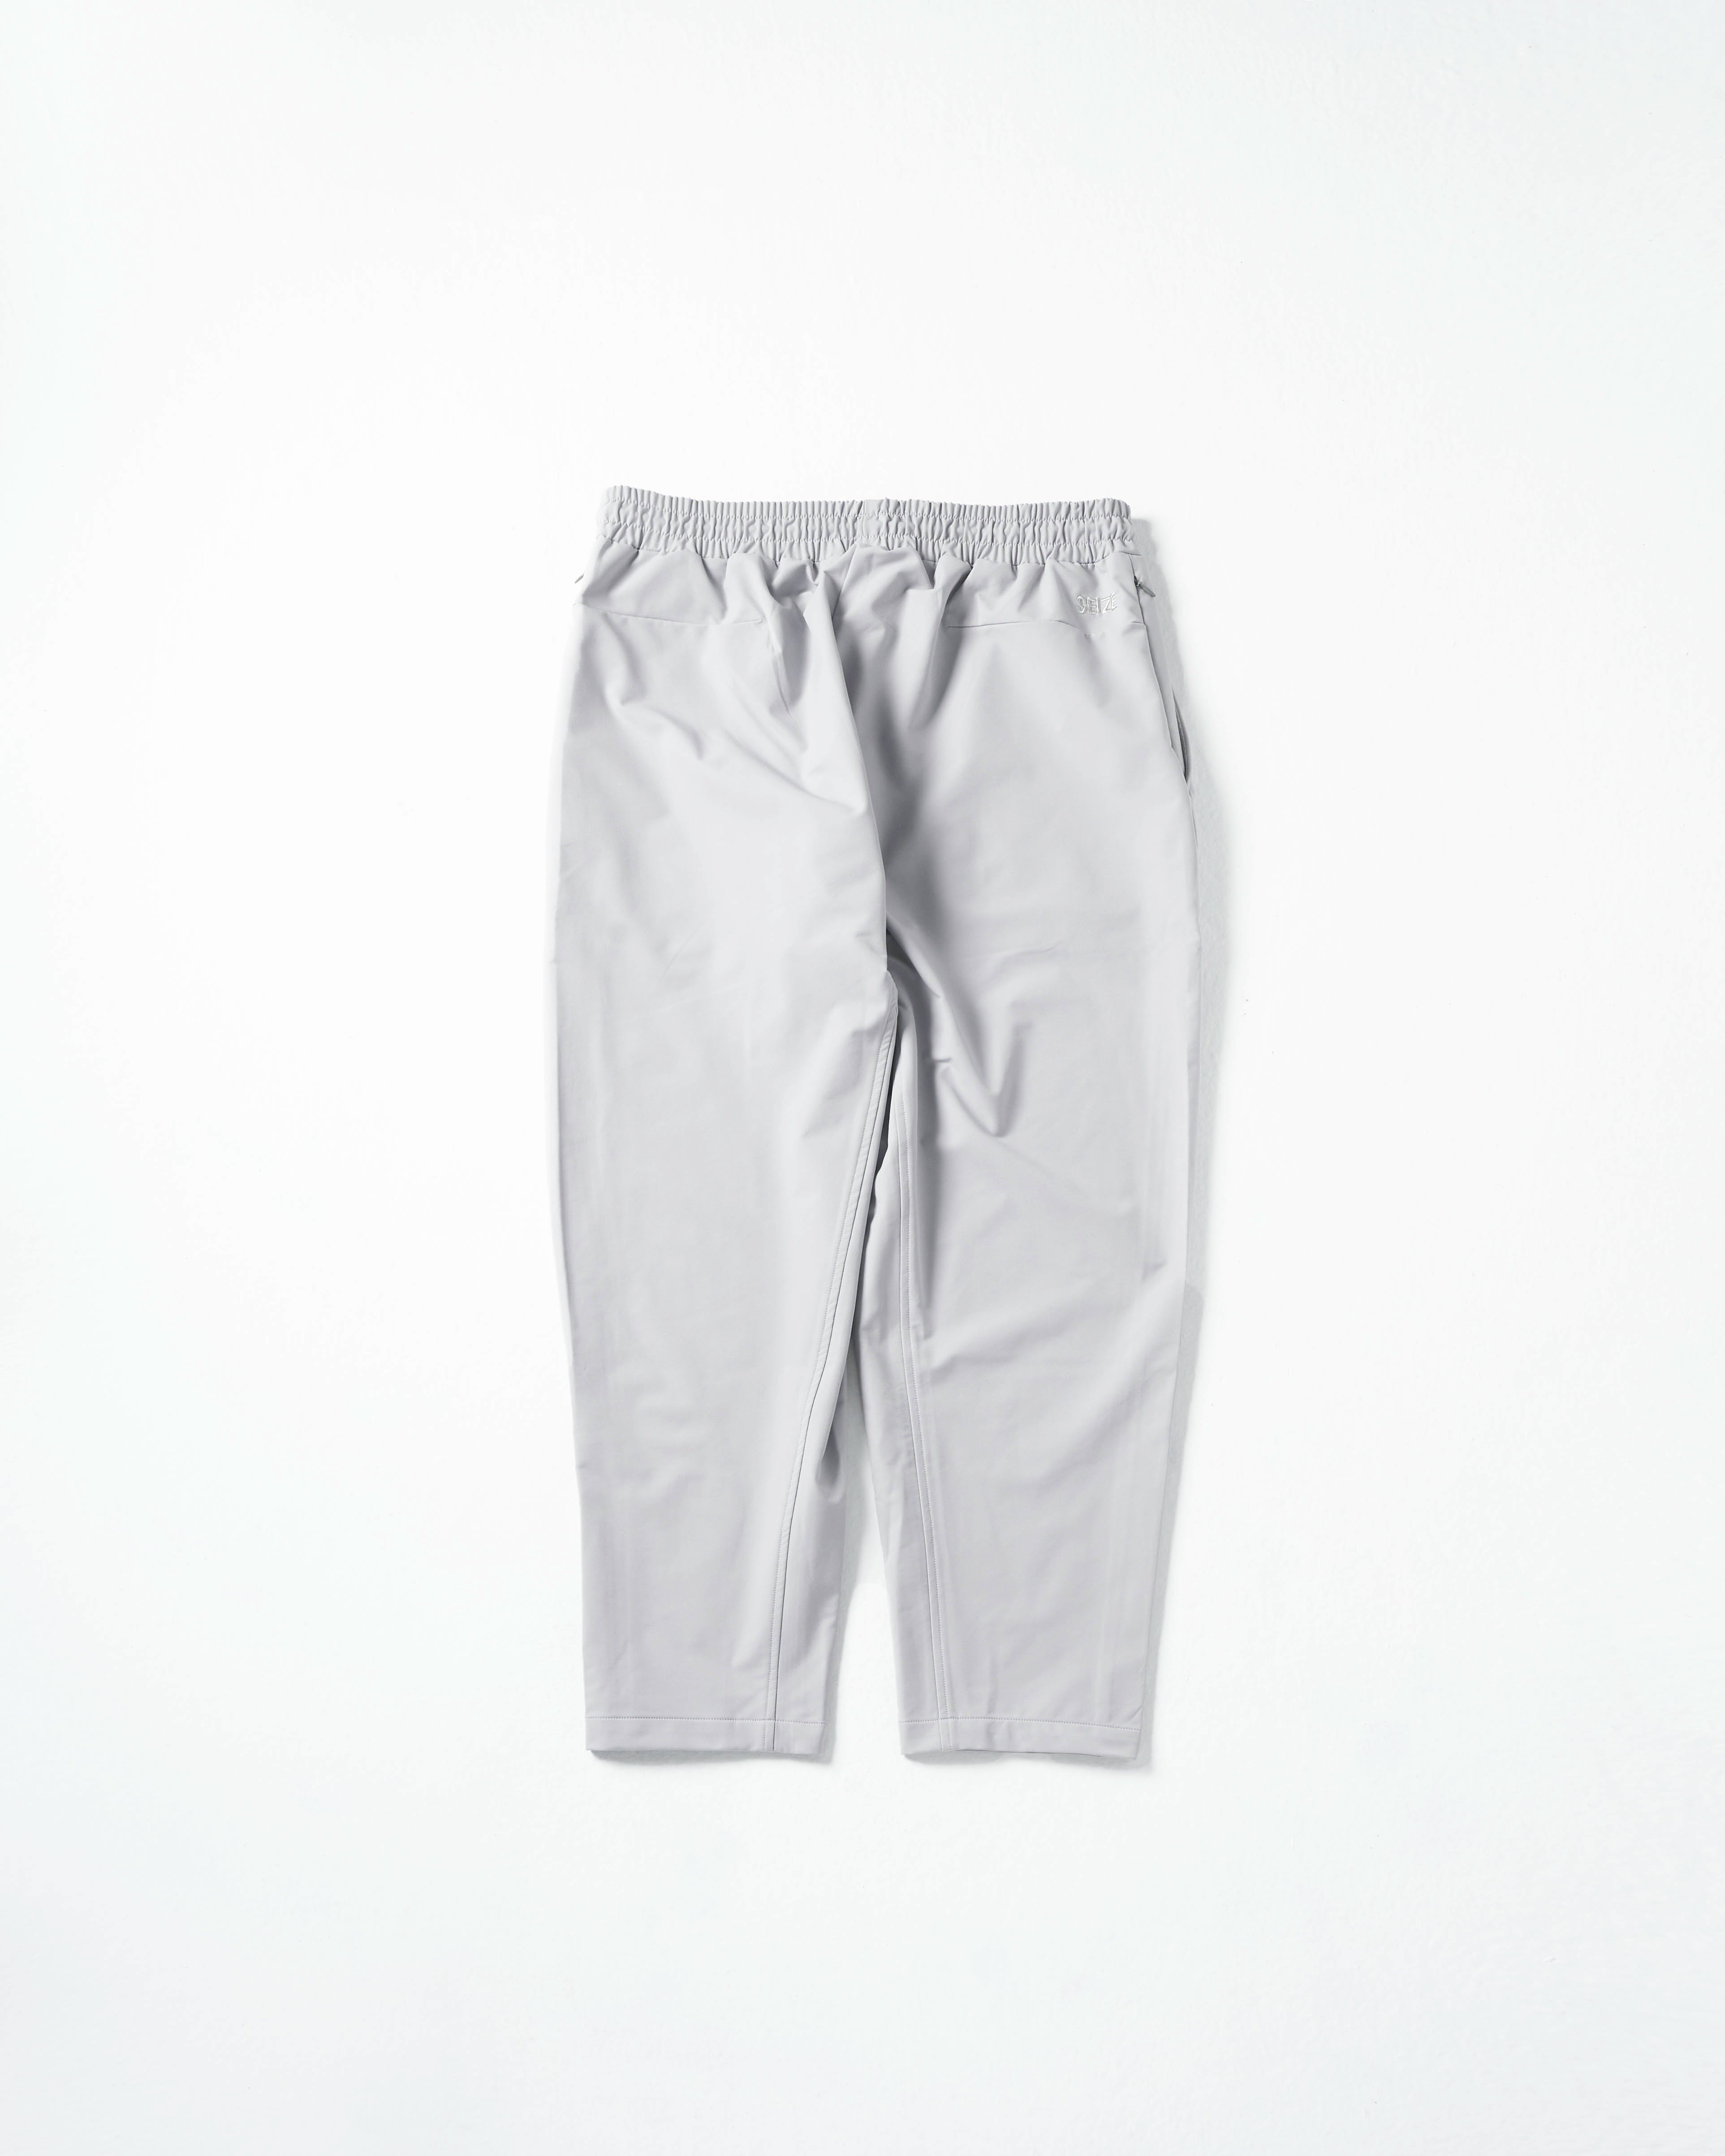 SEIZE 23AW - TECH TAPERED EASY PANTS V2 - LIGHT GREY